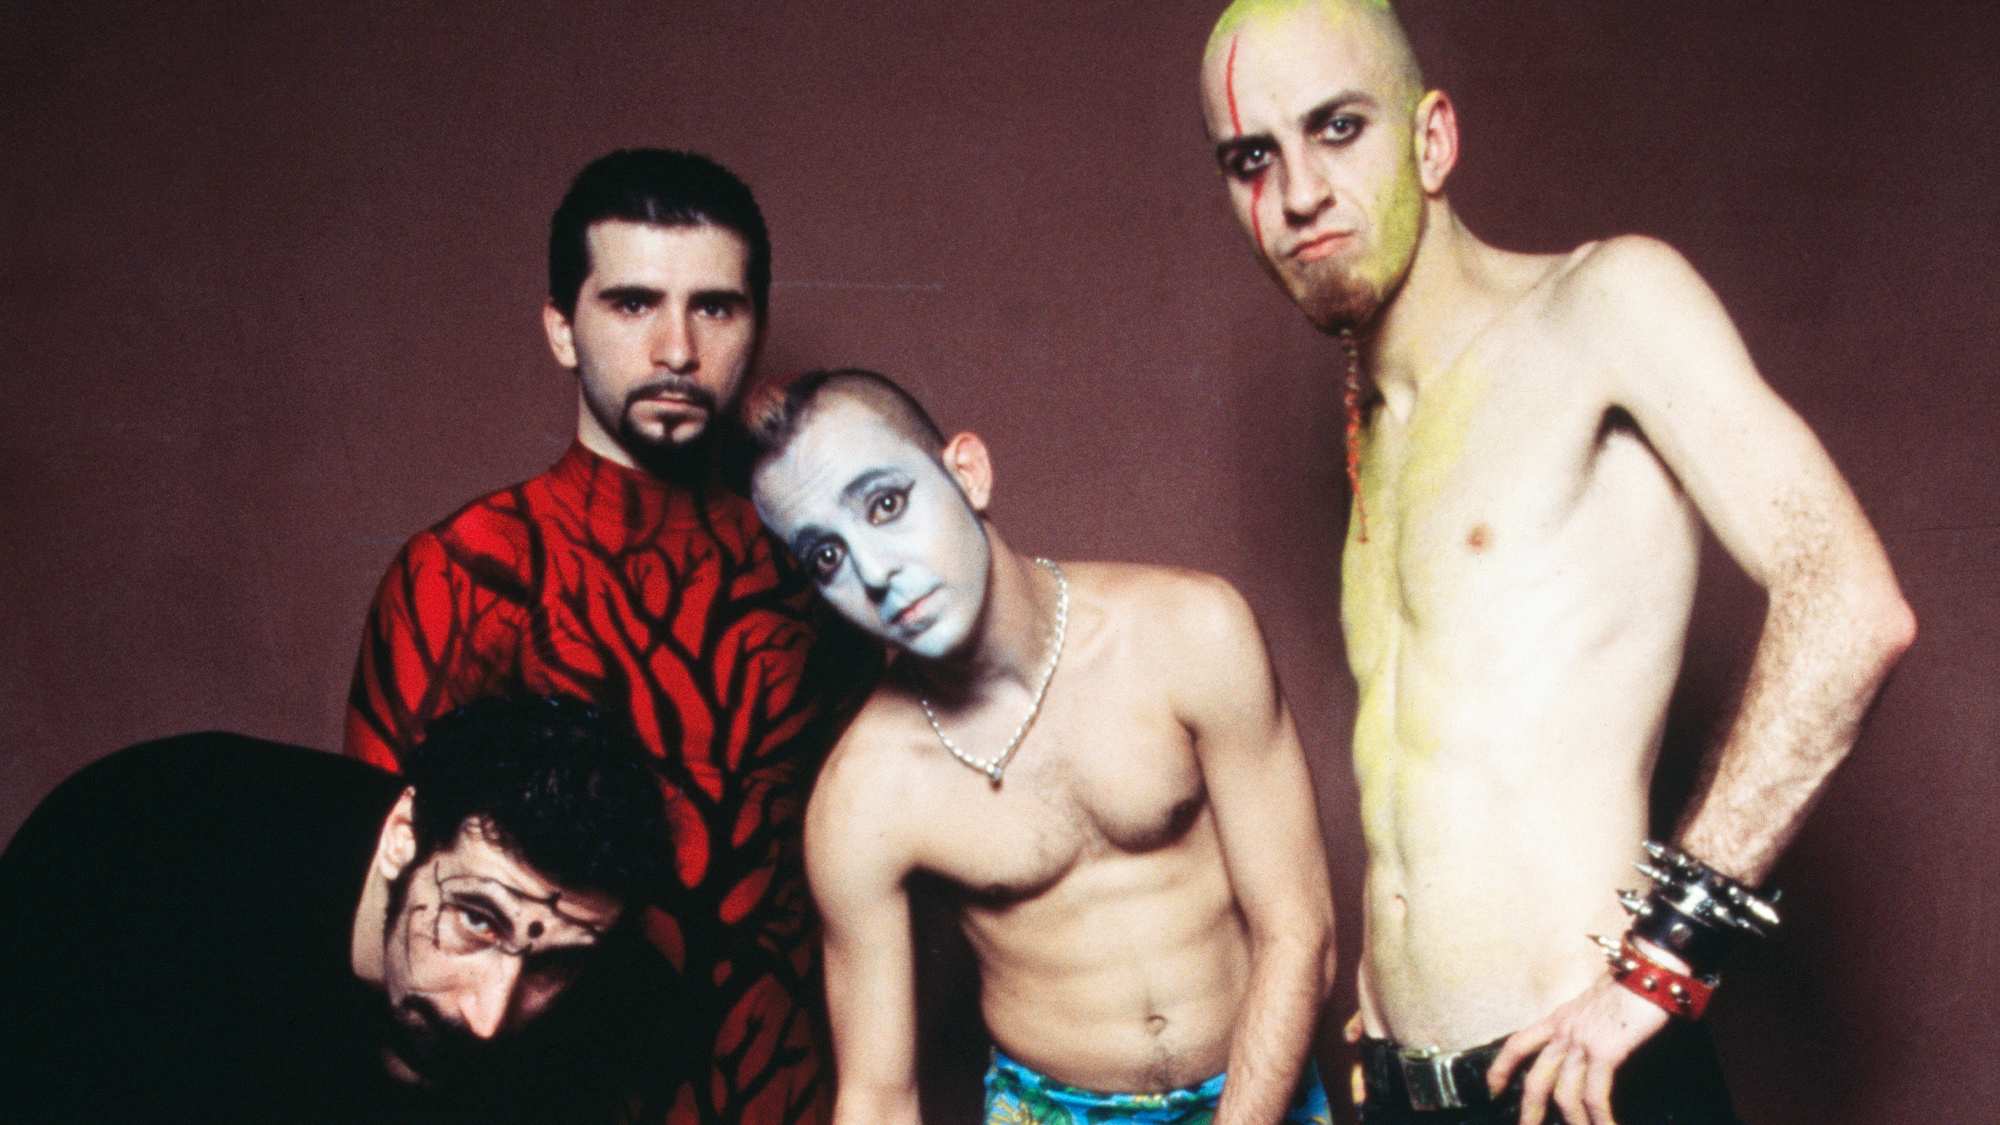 System of a Down's Toxicity bulldozed a path through life's messiness and mayhem - Double J